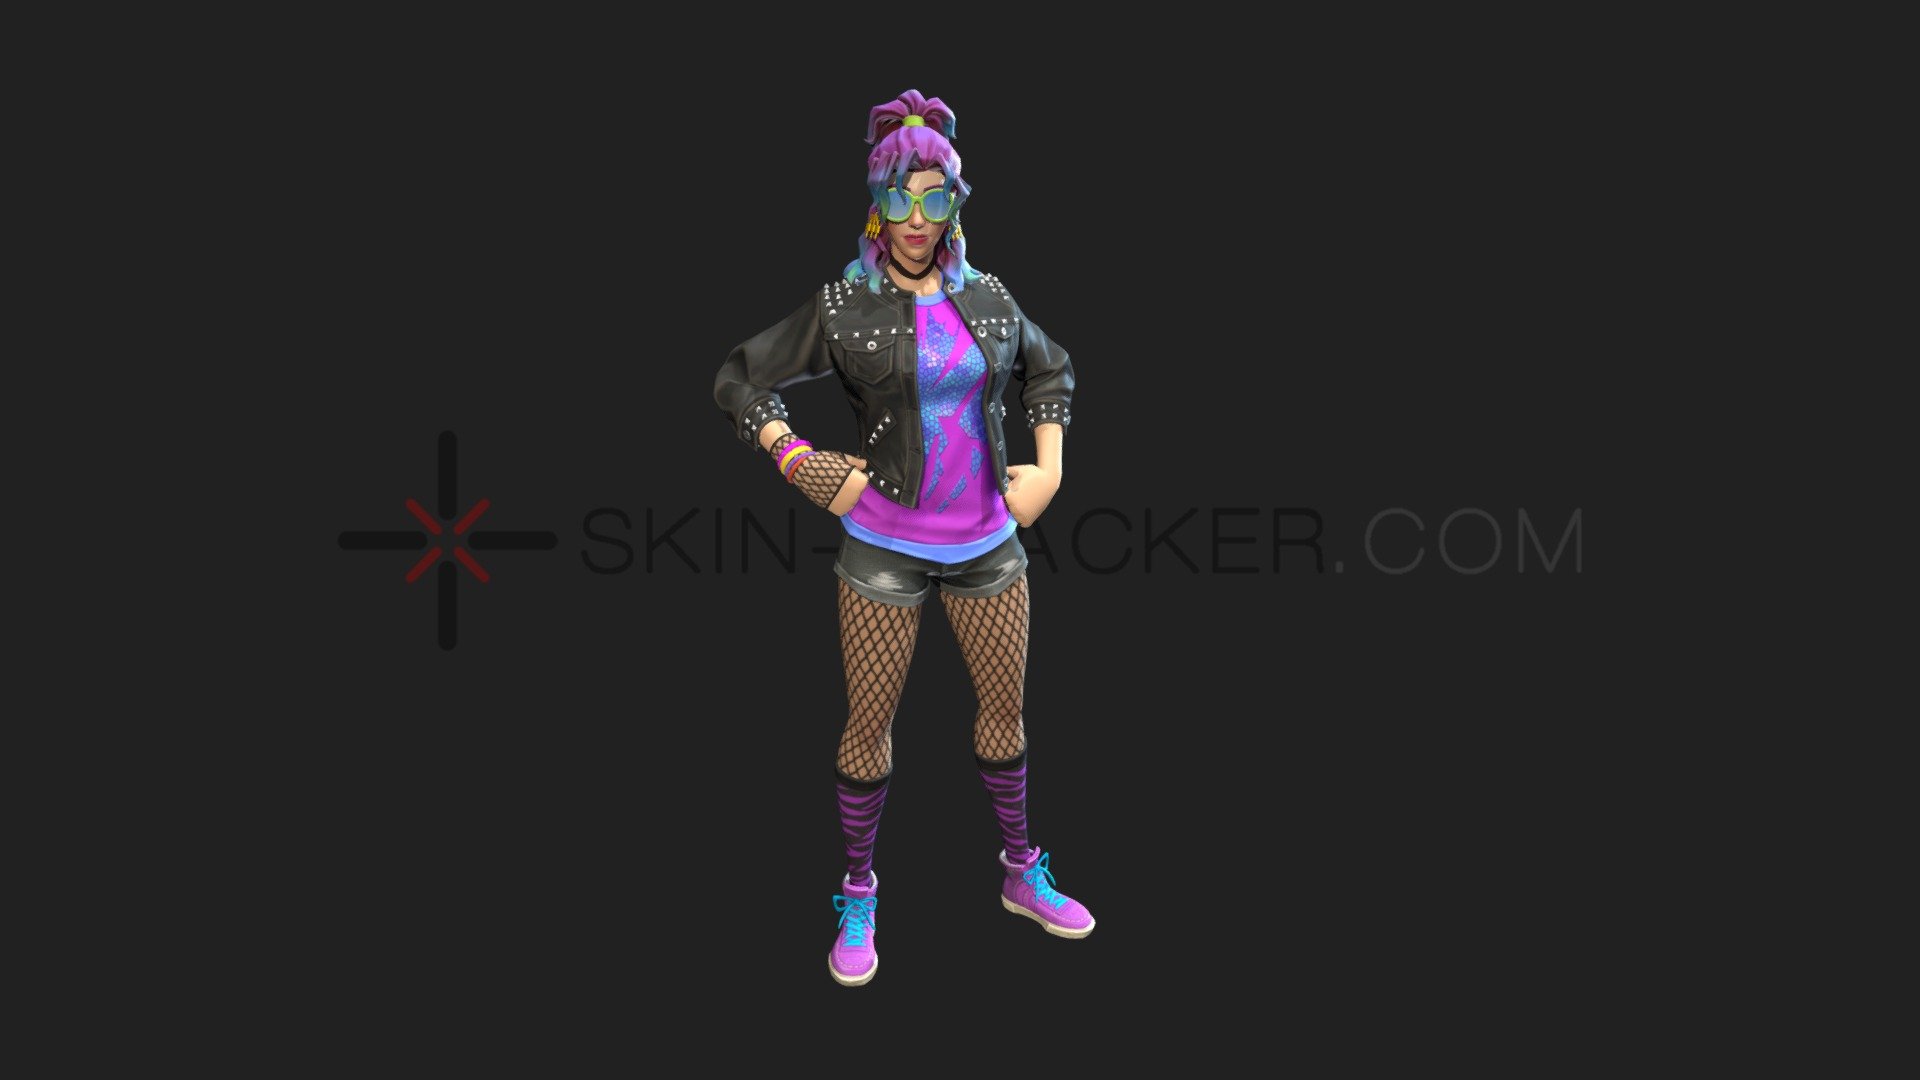 Synth Star Fortnite Wallpapers